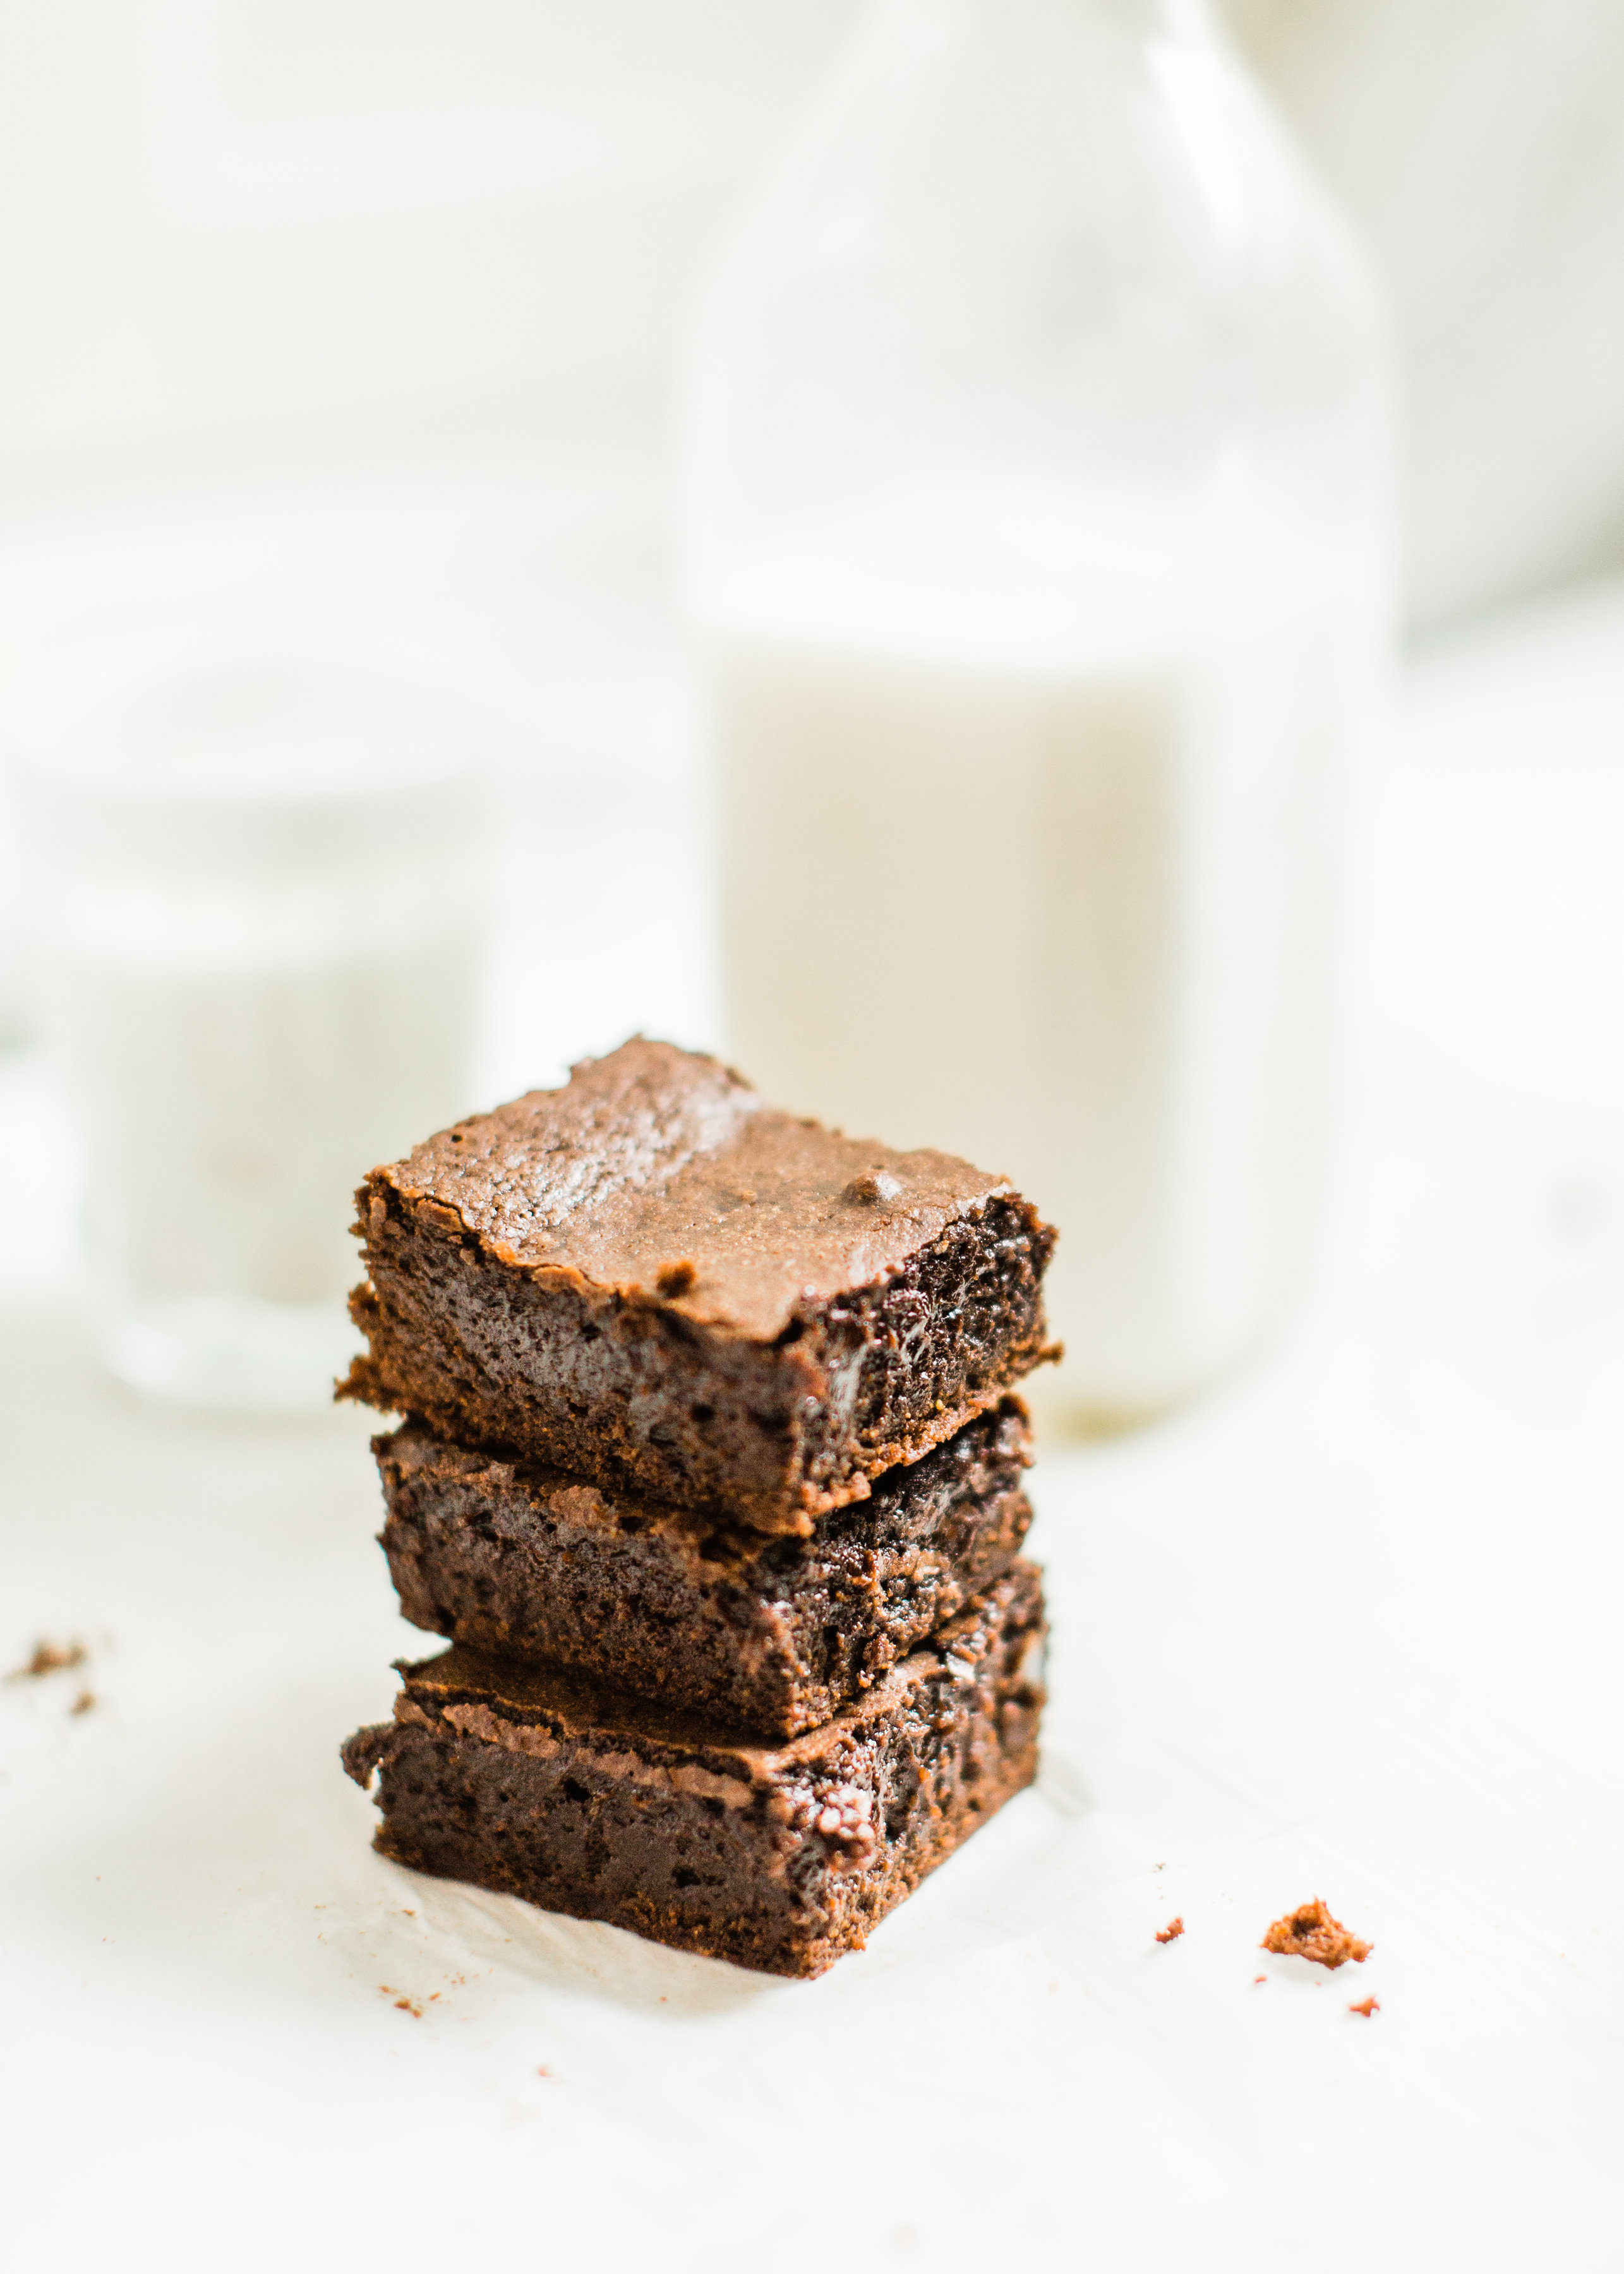 These homemade fudgy, chewy, cakey brownies | @glitterinc